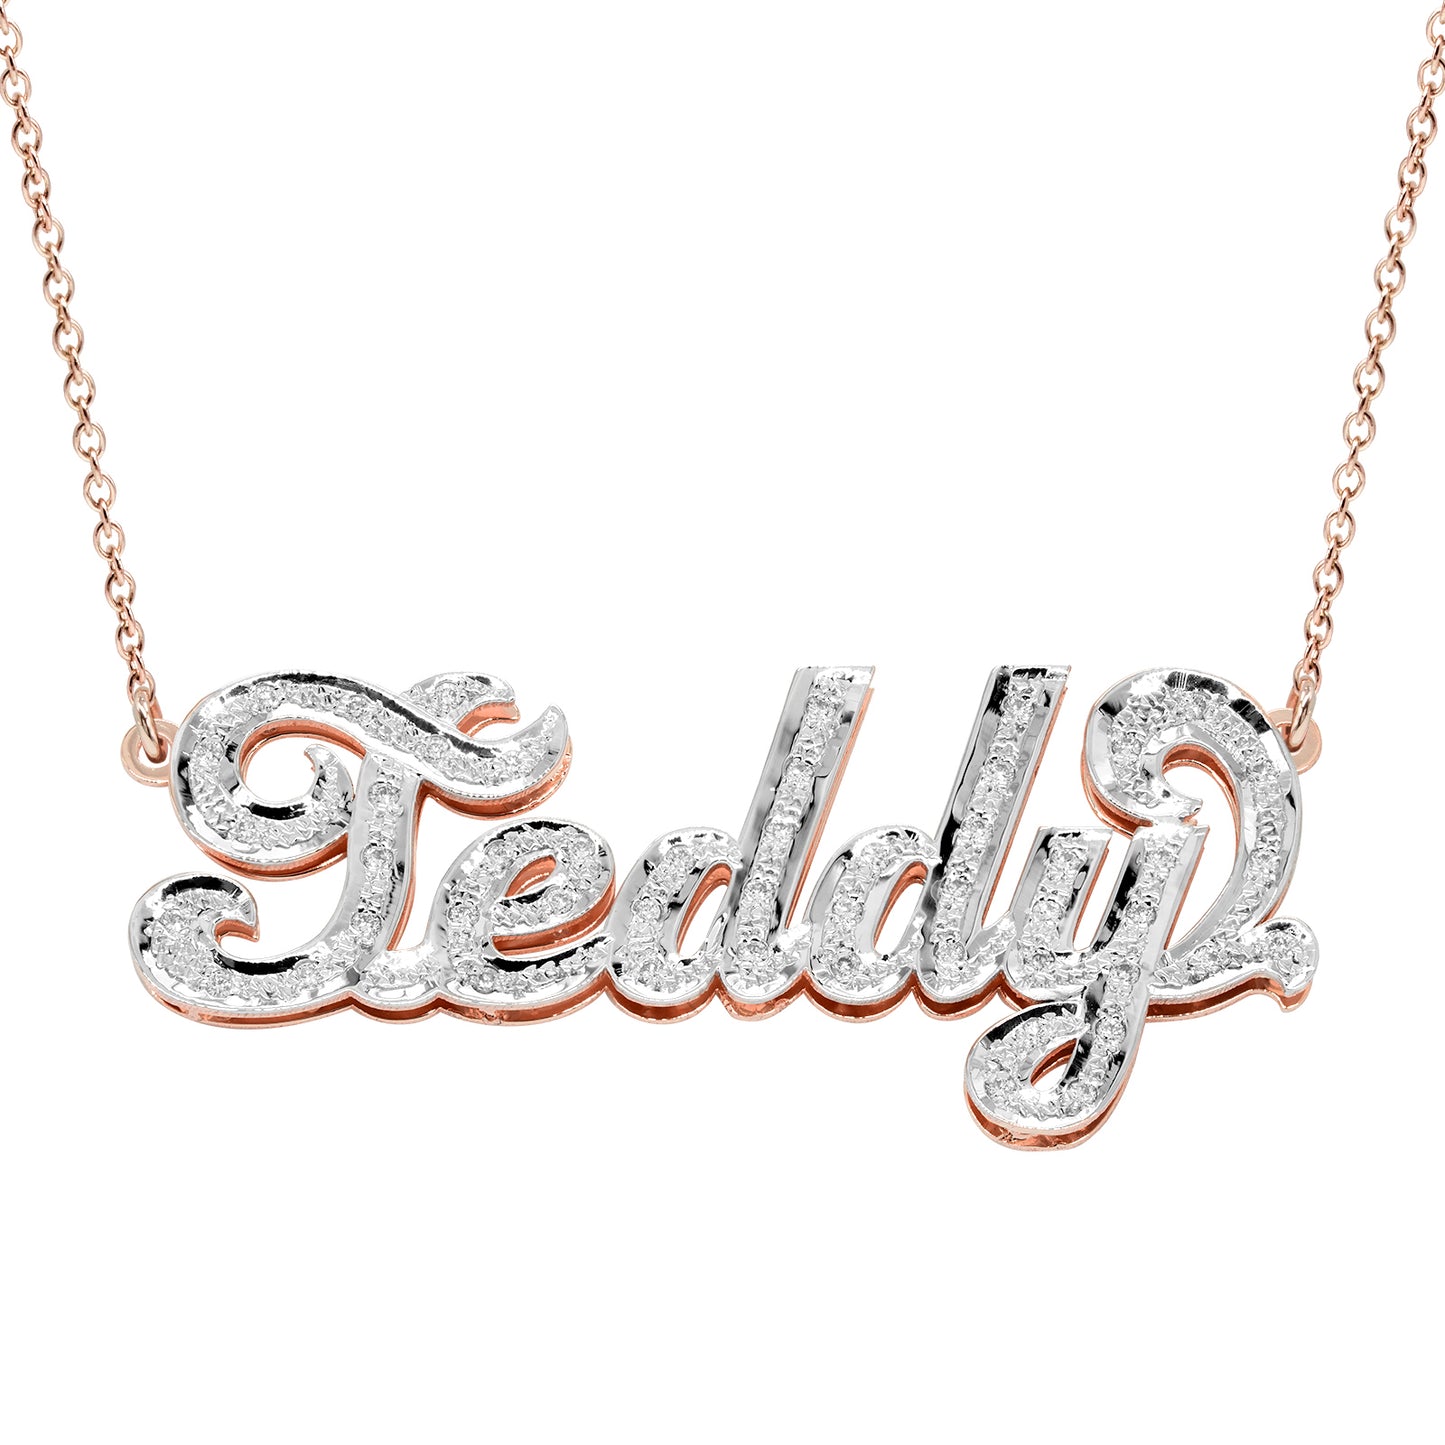 14K Gold Nameplate Necklace with Shadowbox and Full Rhodium Sparkle